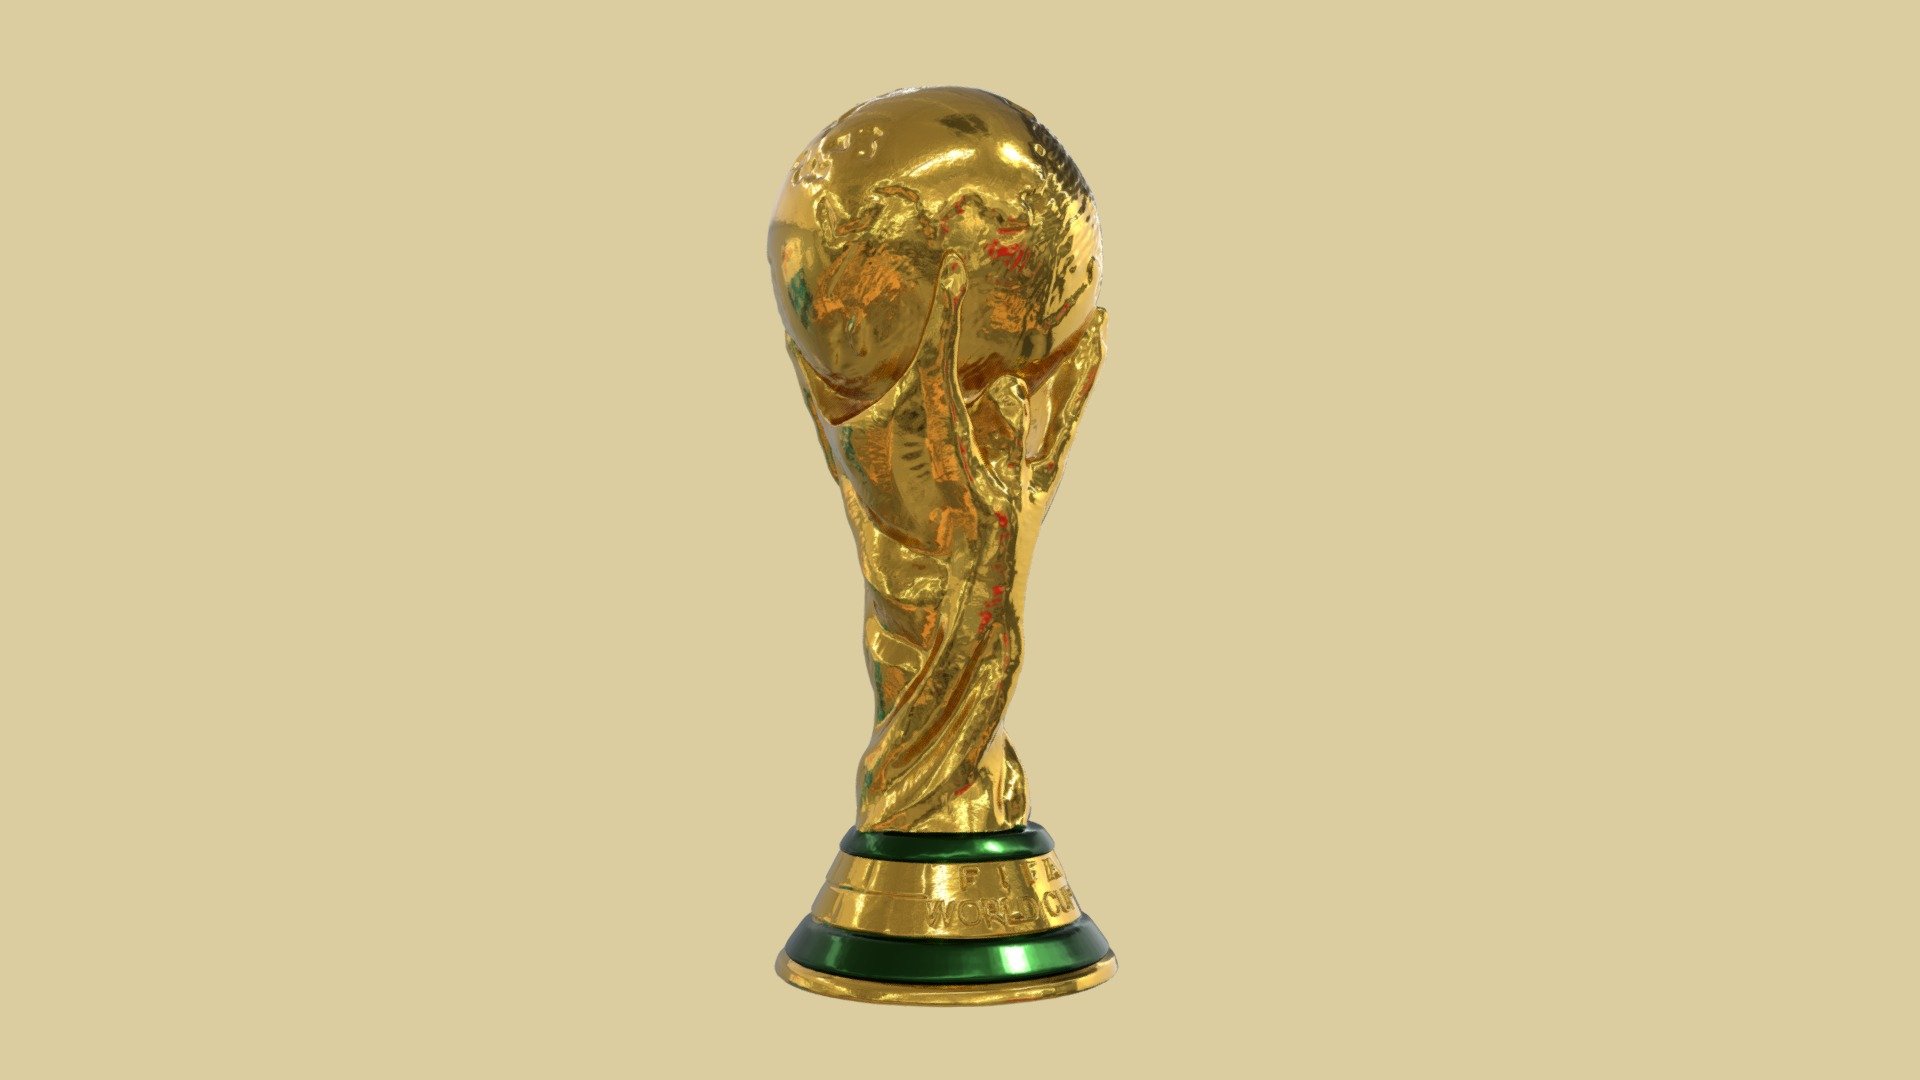 FIFA World Cup Trophy 2022

The World Cup is a gold trophy that is awarded to the winners of the FIFA World Cup association football tournament. Since the advent of the World Cup in 1930, two trophies have been used: the Jules Rimet Trophy from 1930 to 1970, and the FIFA World Cup Trophy from 1974 to the present day. It is one of the most expensive trophies in sporting history, valued at $20 million 3d model